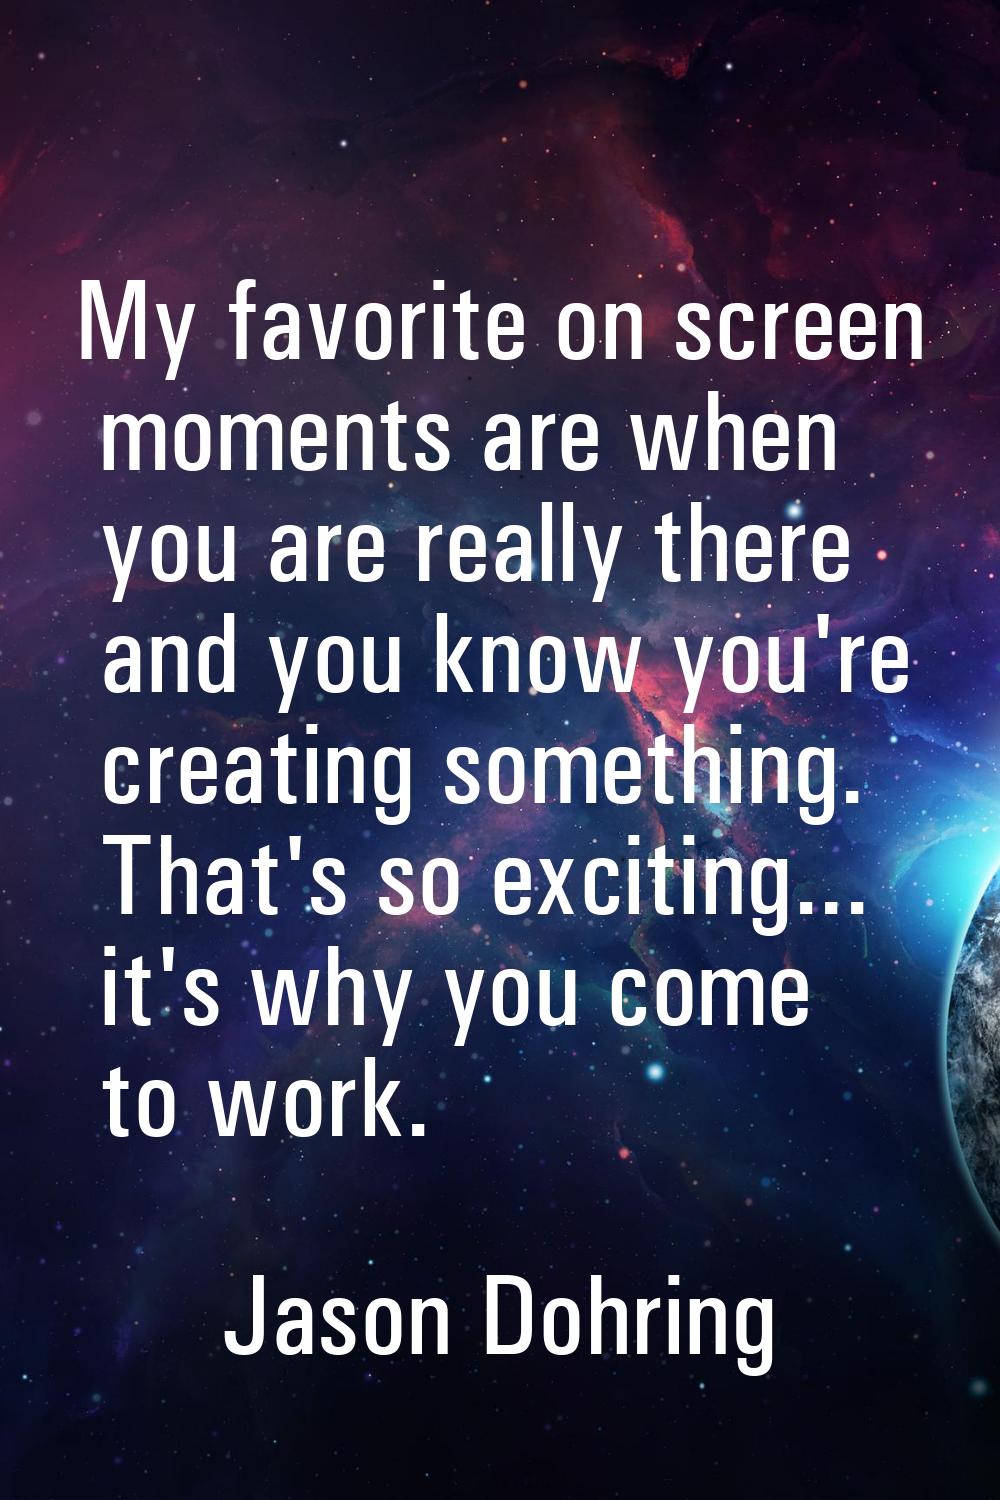 My favorite on screen moments are when you are really there and you know you're creating something.